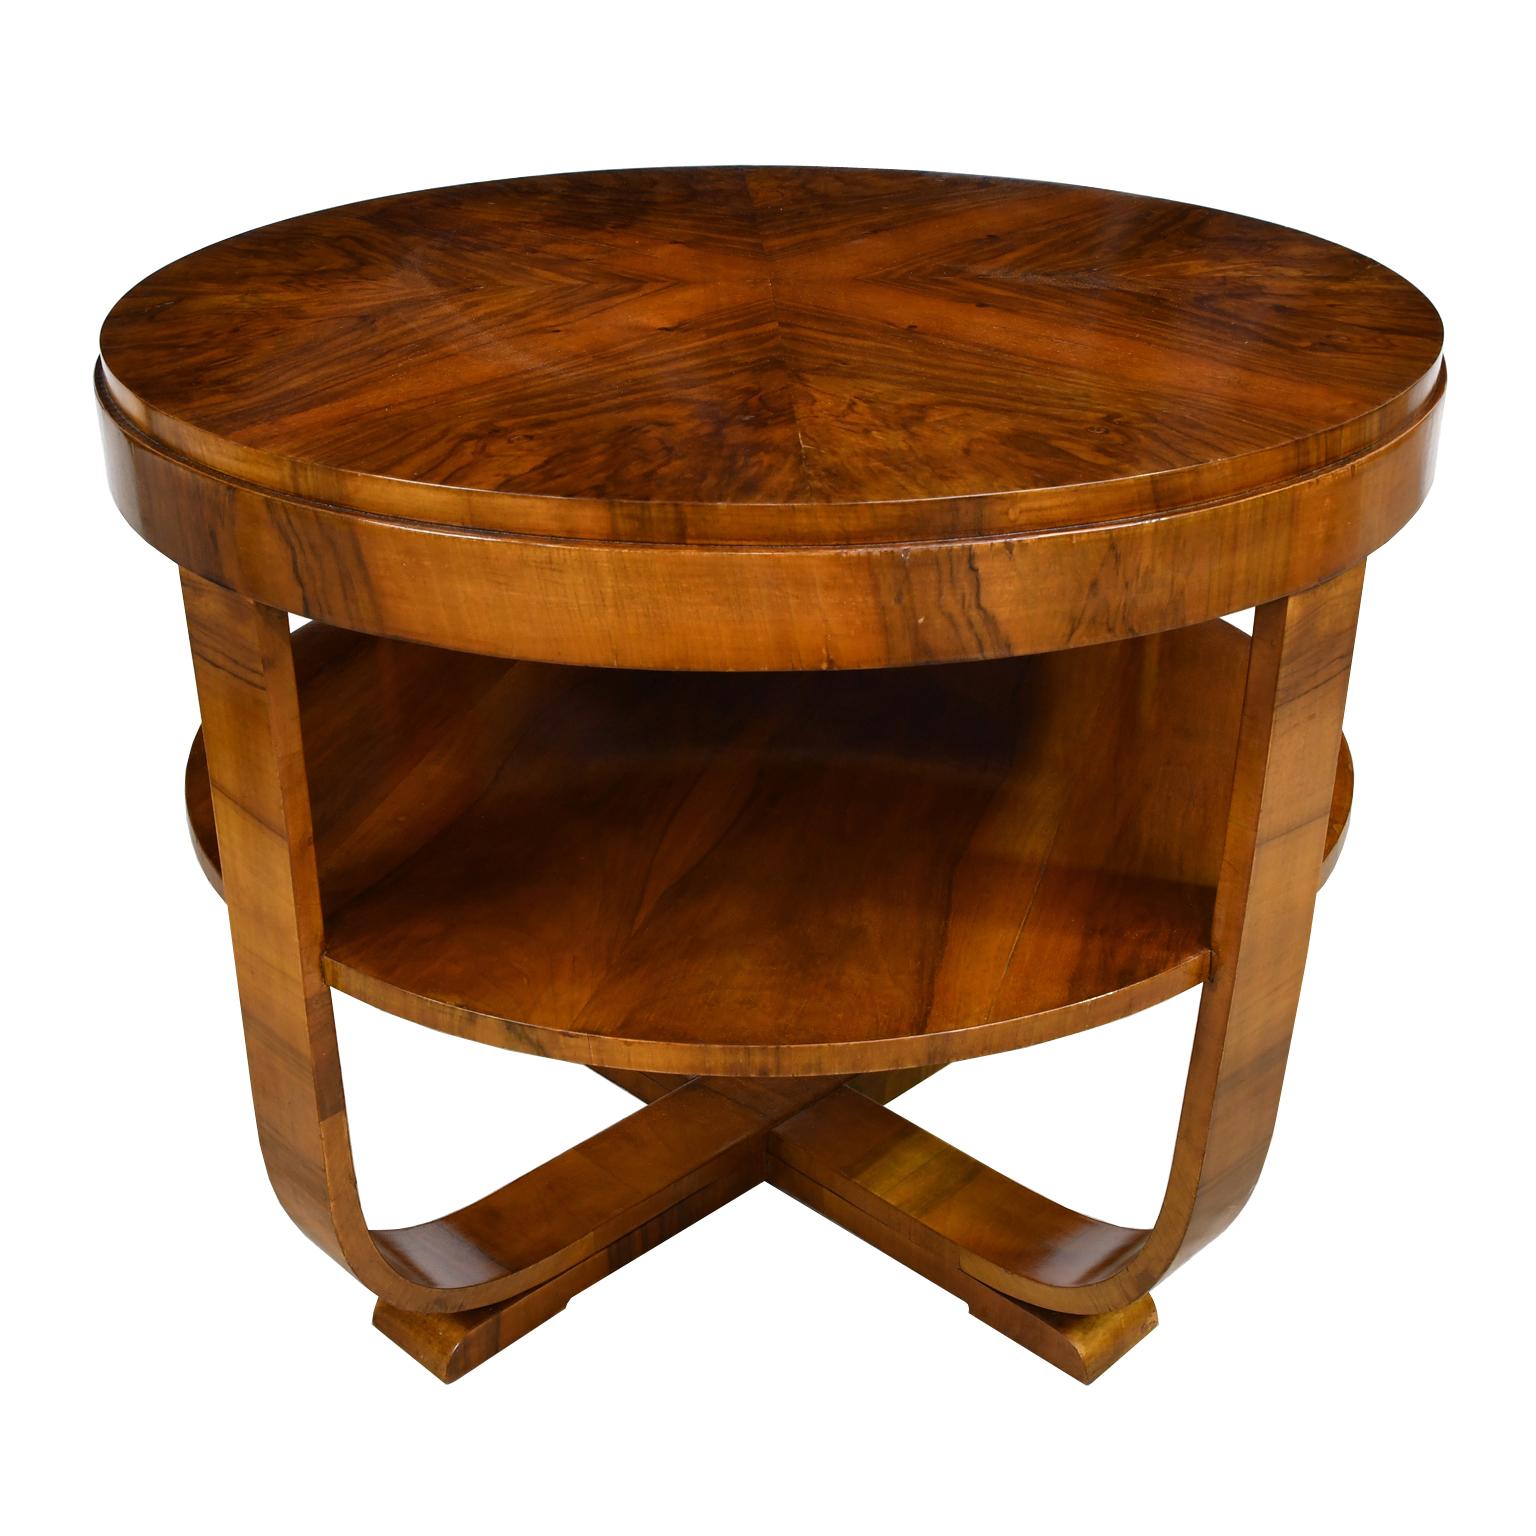 A very handsome Austrian Art Deco table with round top designed to create an 